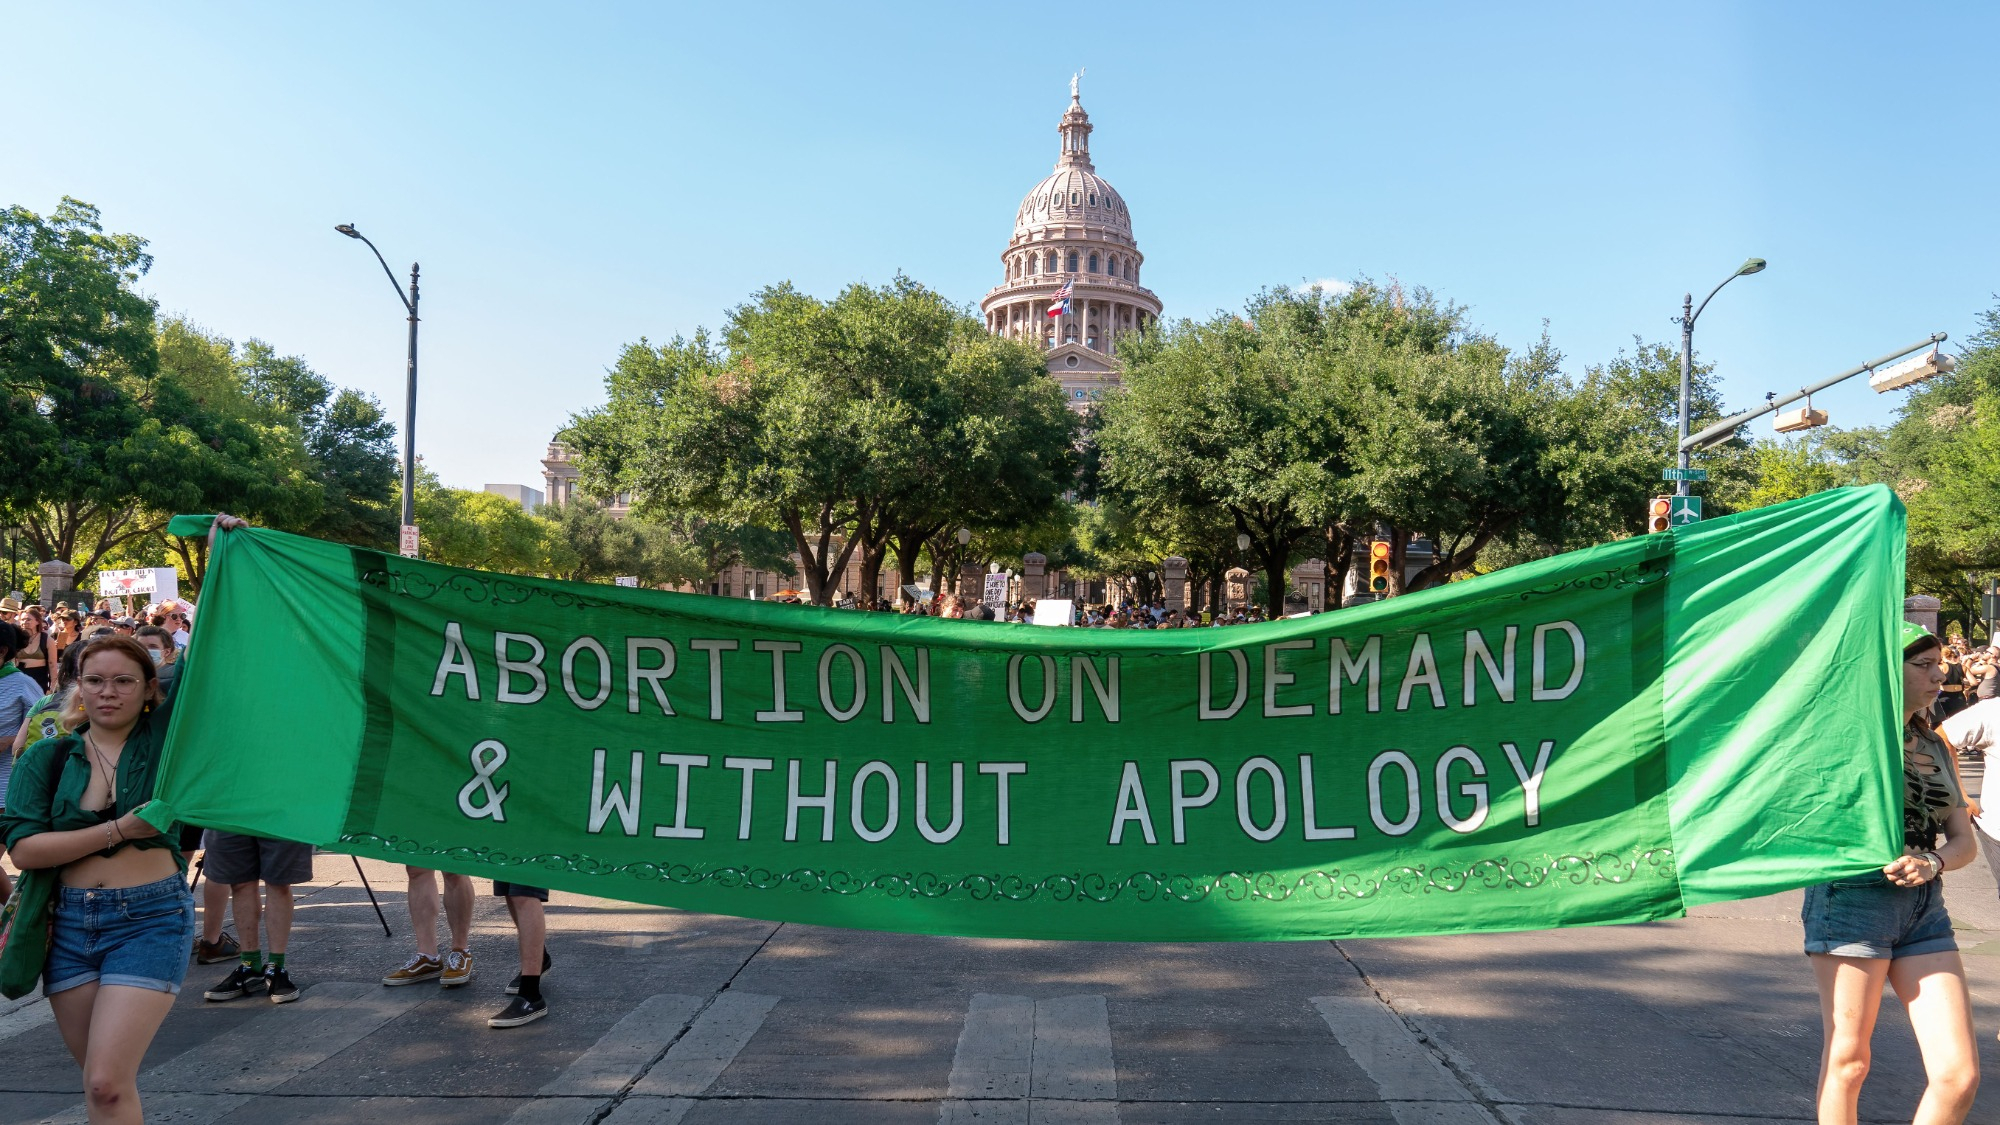 Texas saw a jump in its birth rate after banning most abortions, according to new study